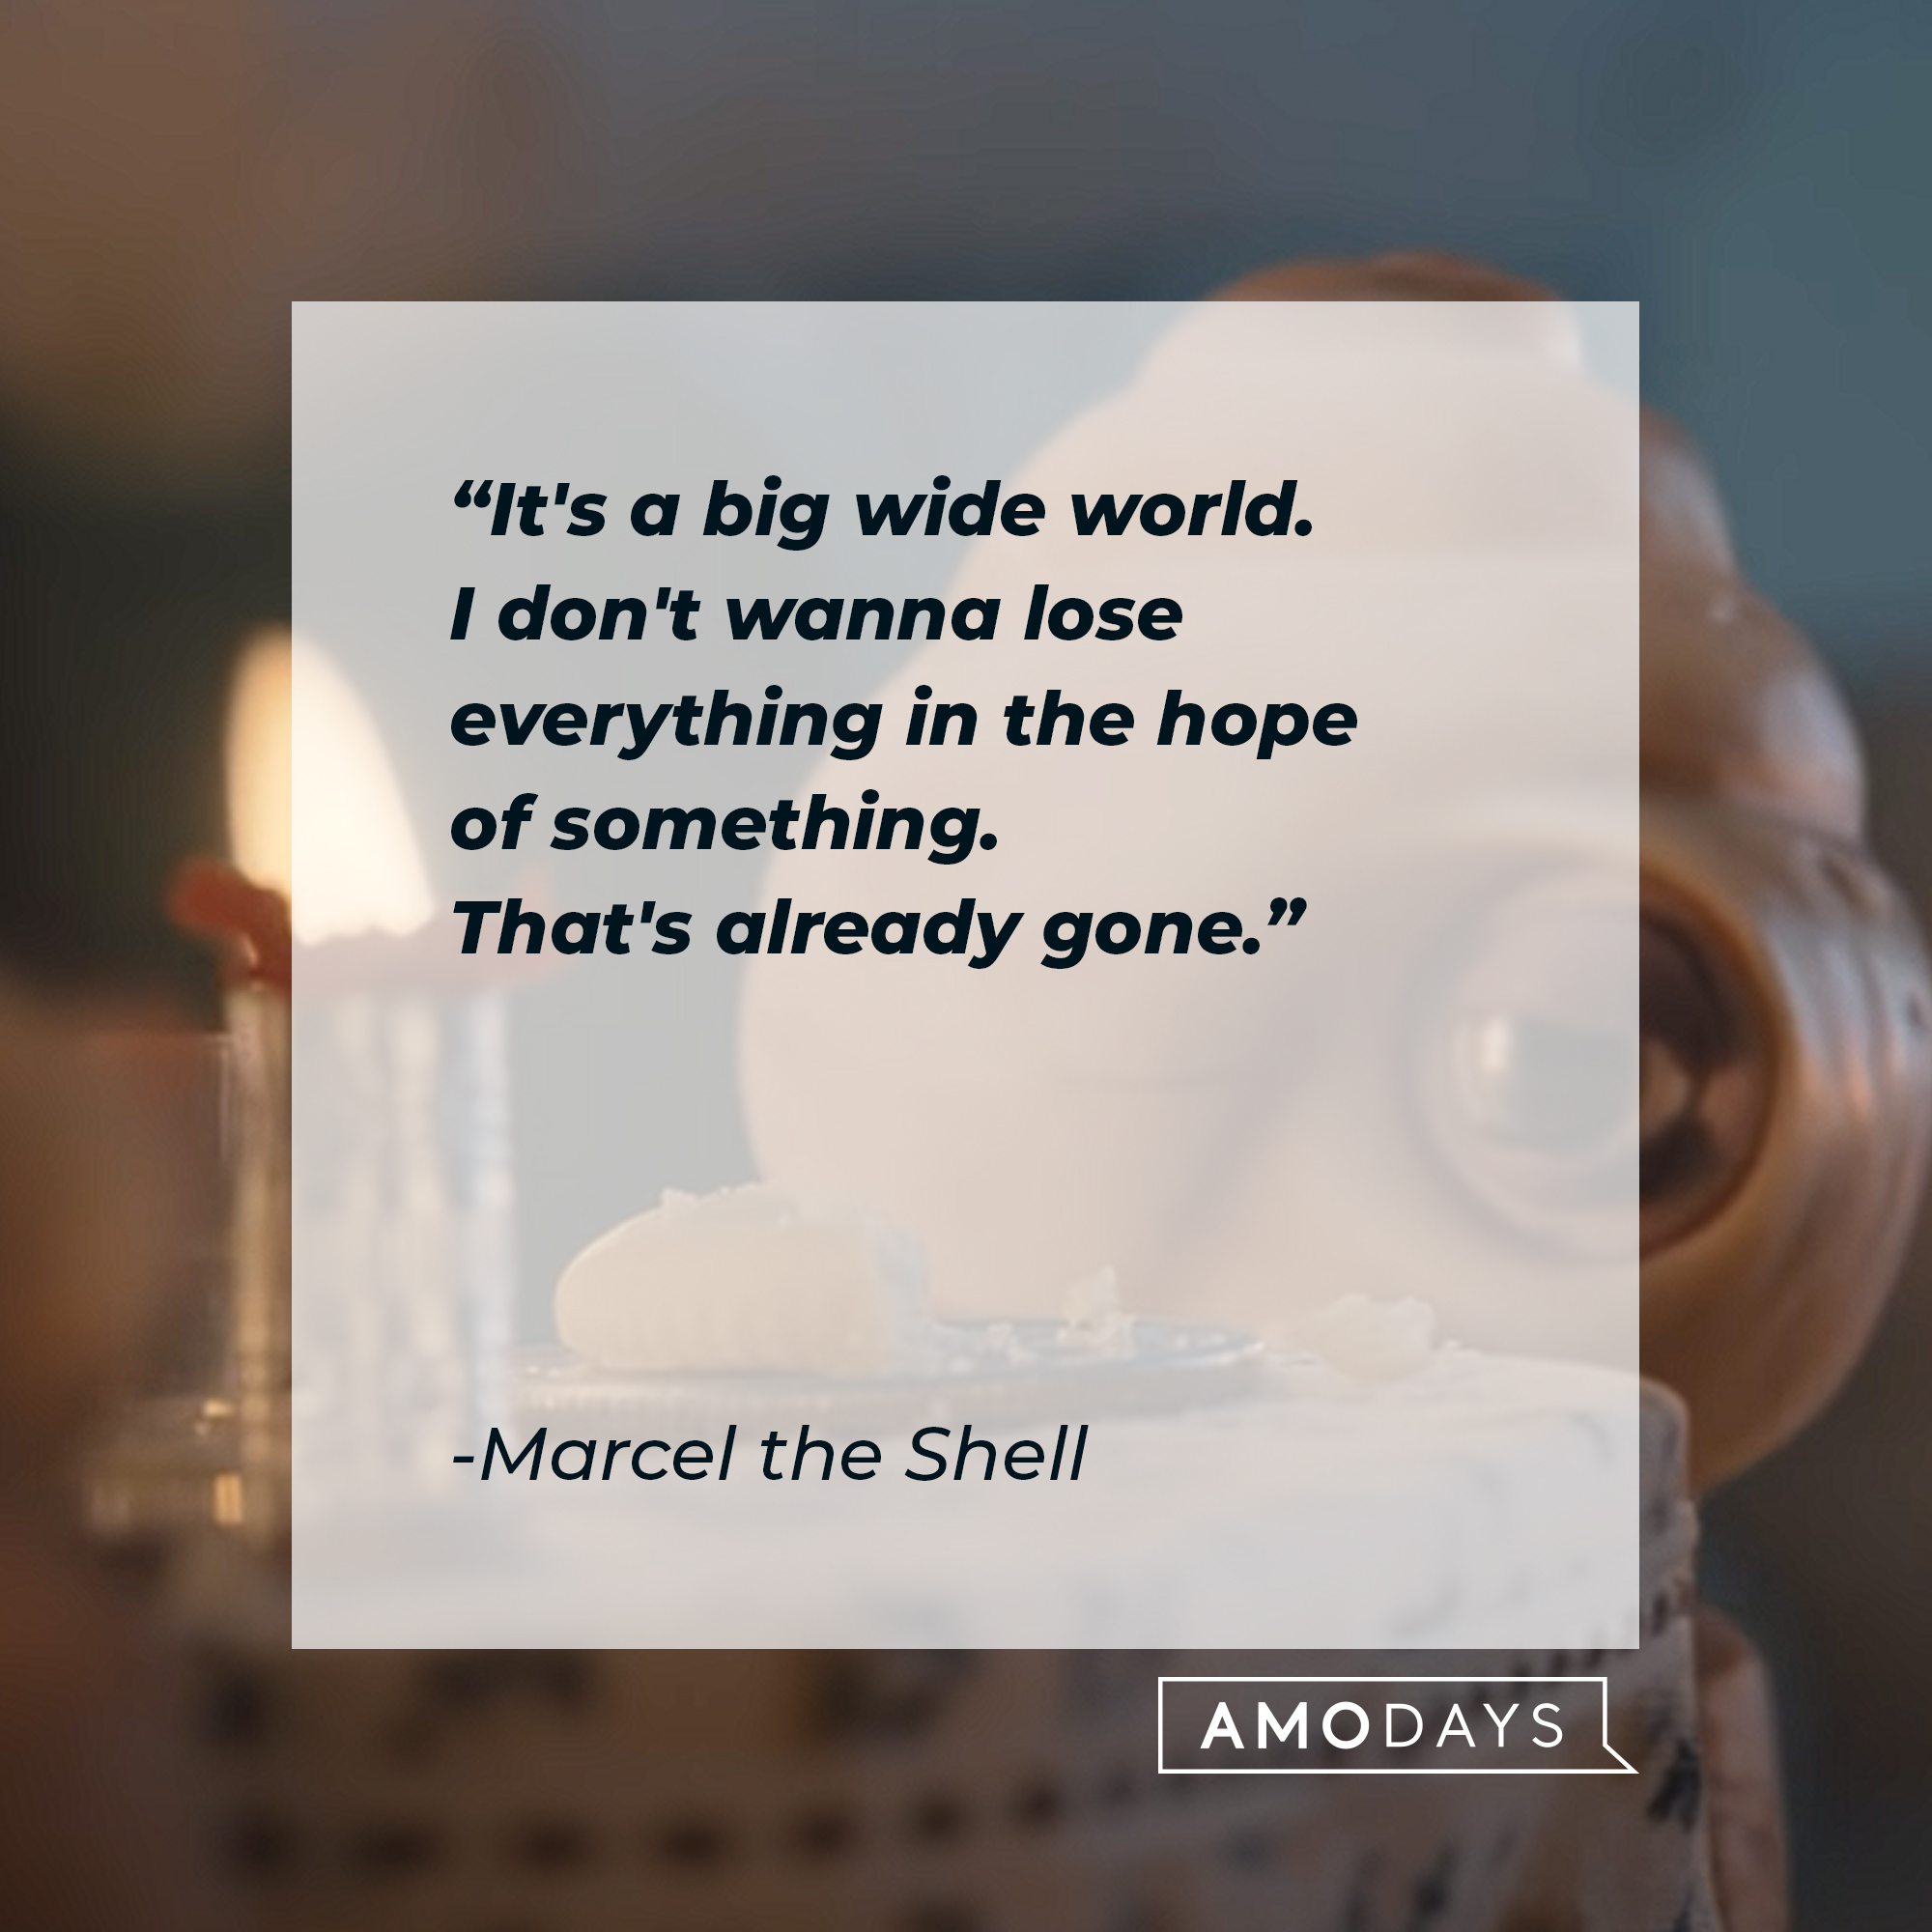 Marcel the Shell's quote: “It's a big wide world. I don't wanna lose everything in the hope of something. That's already gone.” | Source: youtube.com/A24